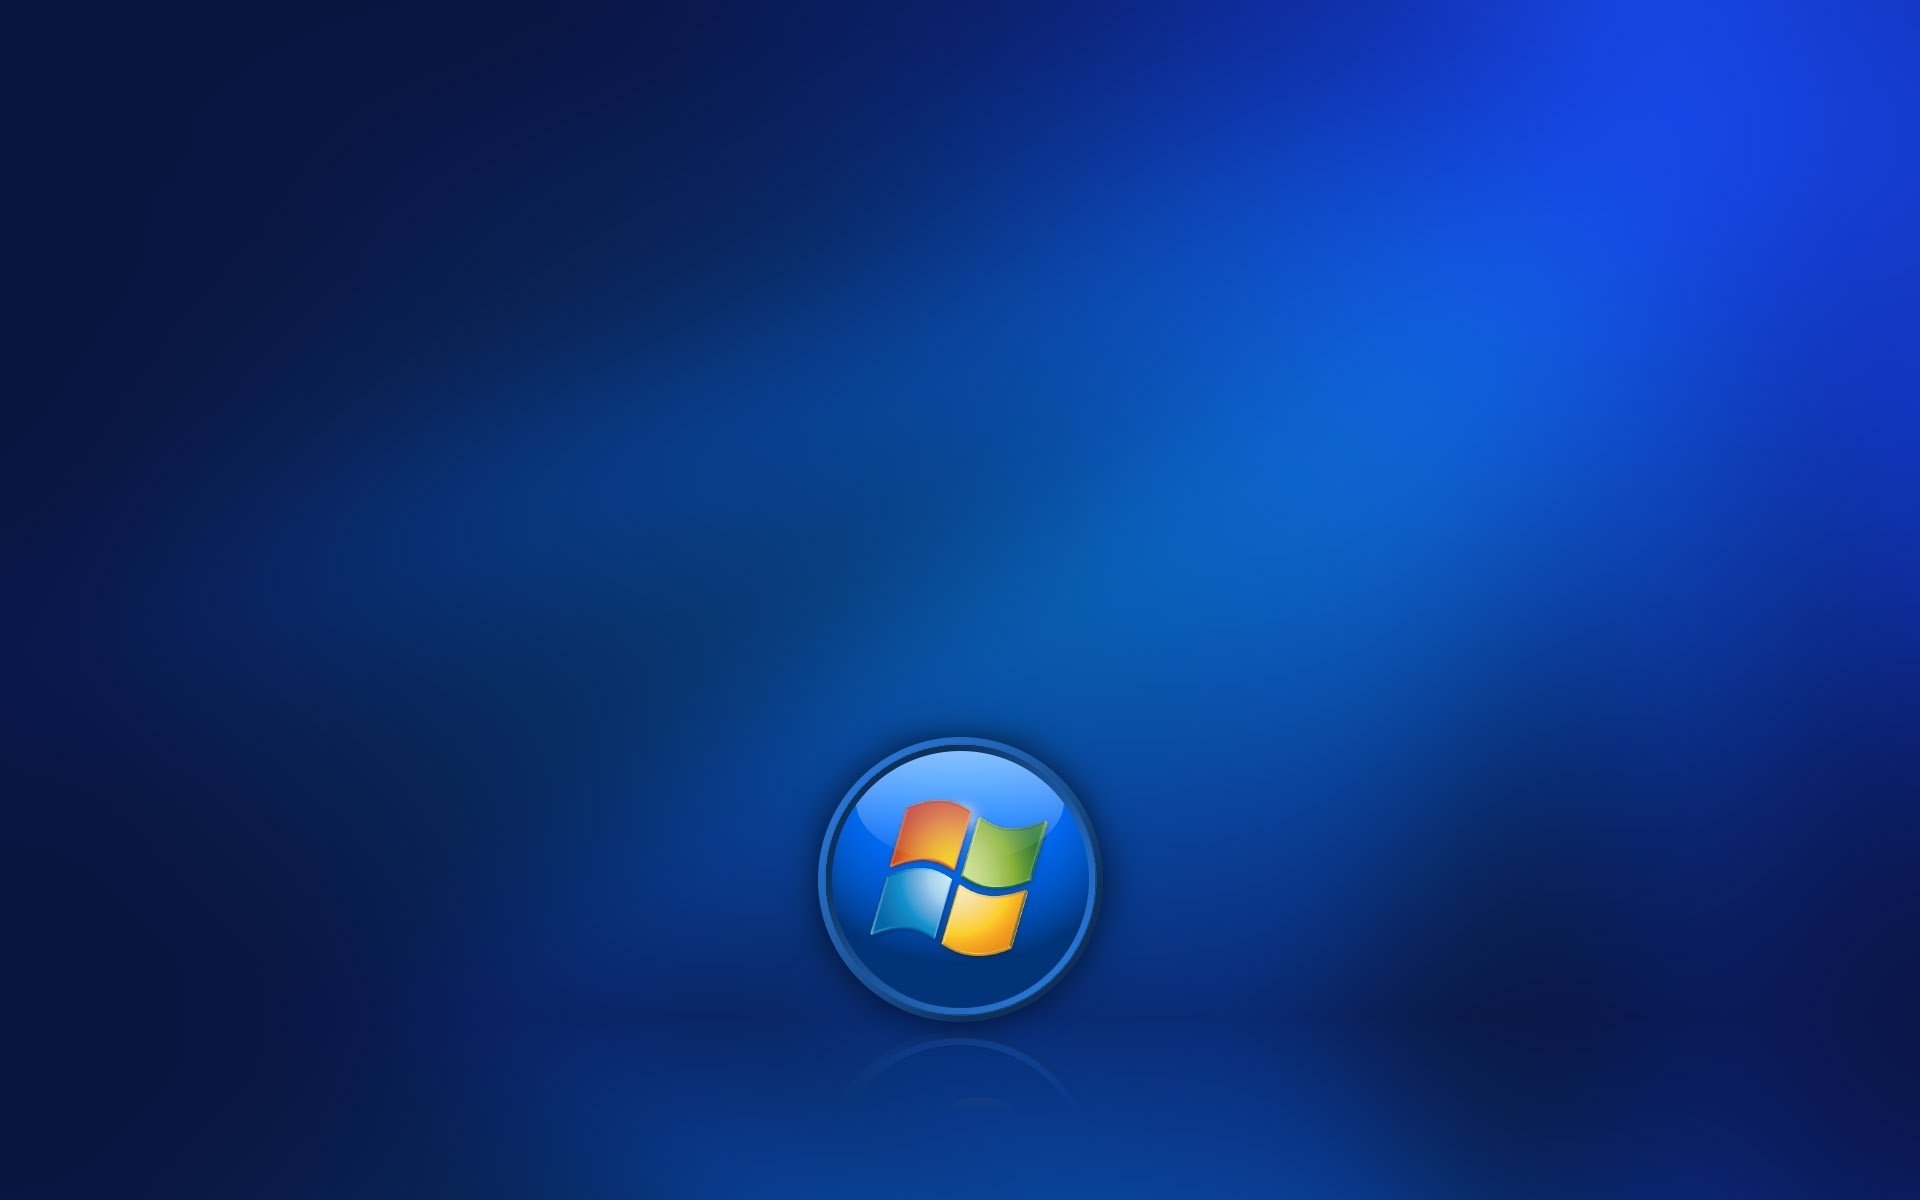 Windows icon on a blue background